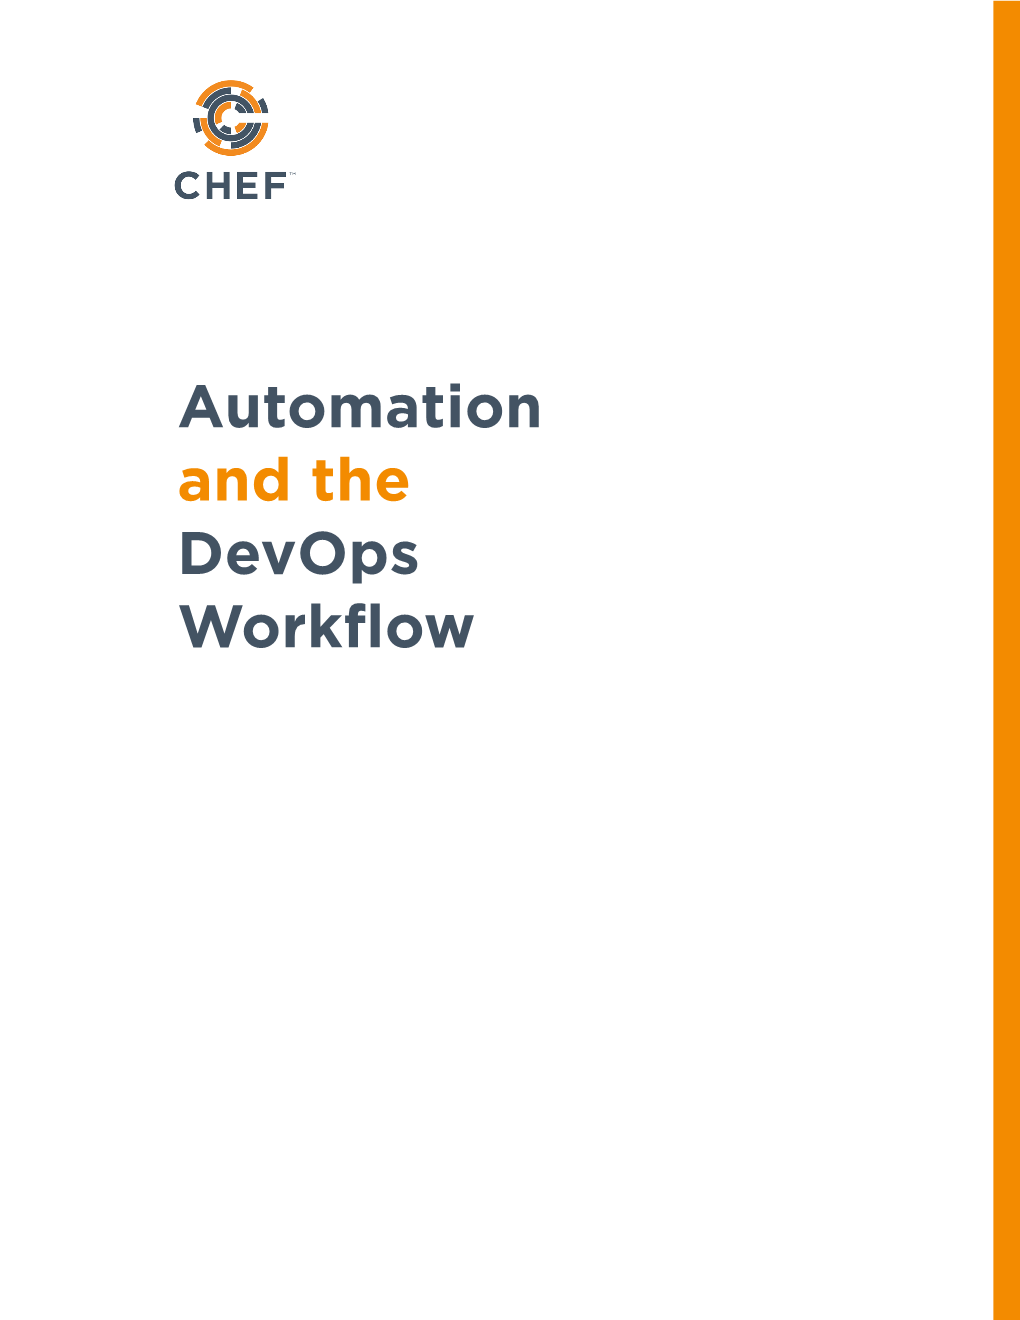 Automation and the Devops Workflow Copyright © 2015 Chef Software, Inc